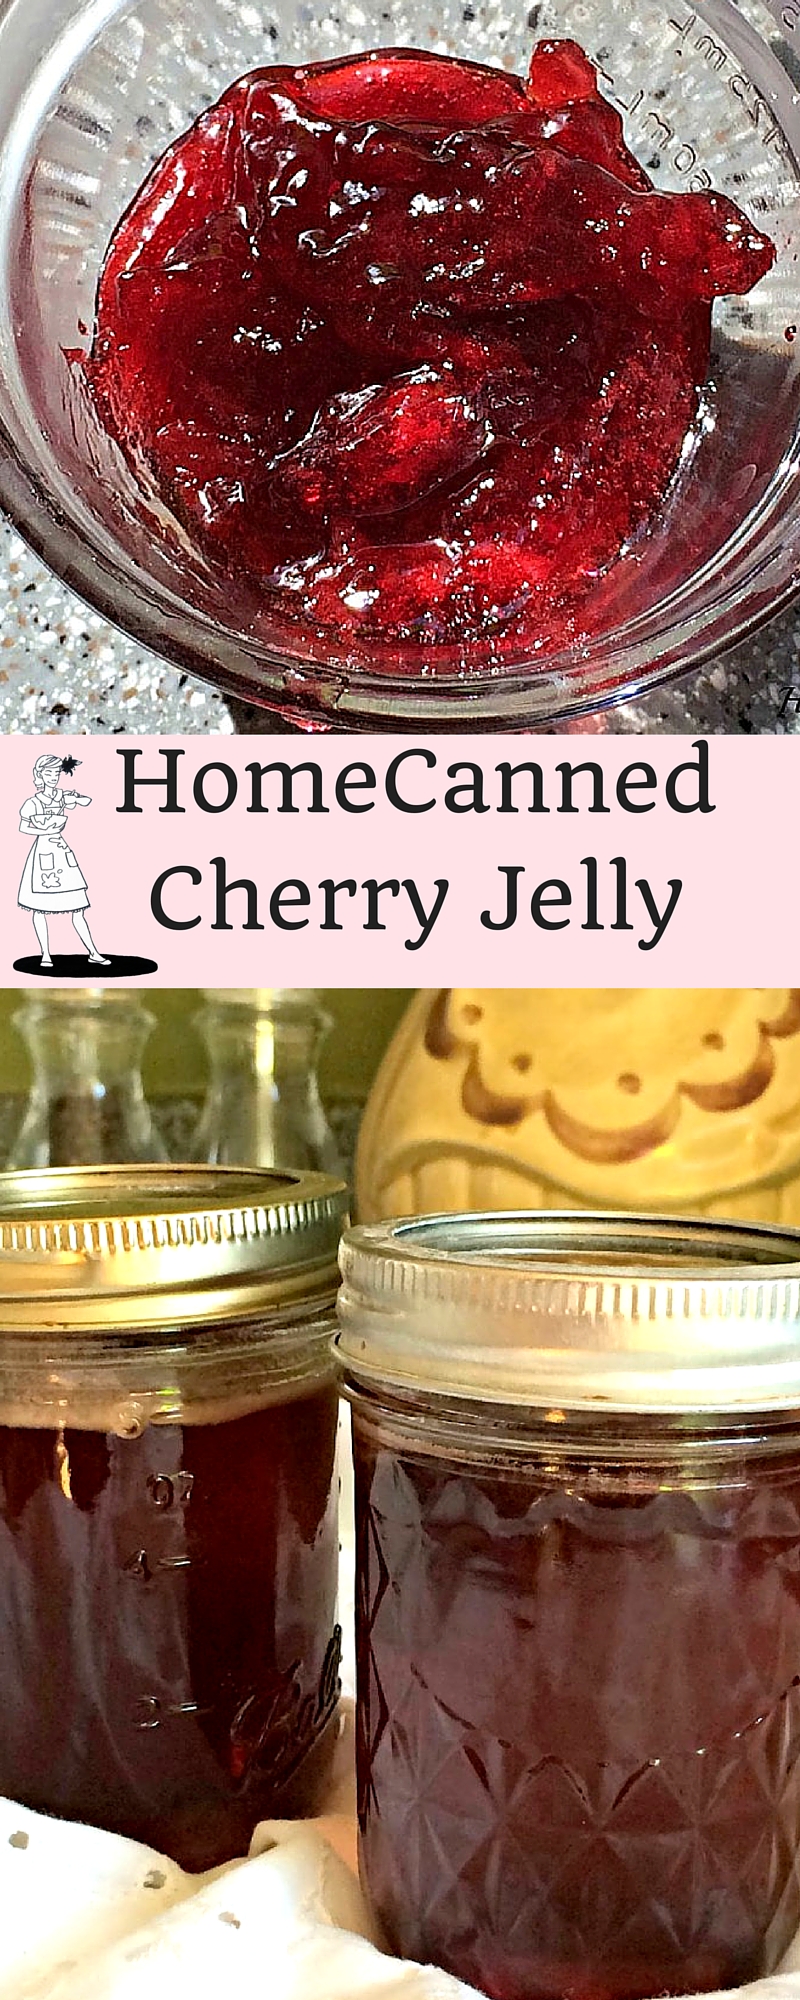 Home Canned Cherry Jelly. Spread it on toast, or pour it over your Sunday Roast. However you serve it, you'll love having this stocked in your pantry.